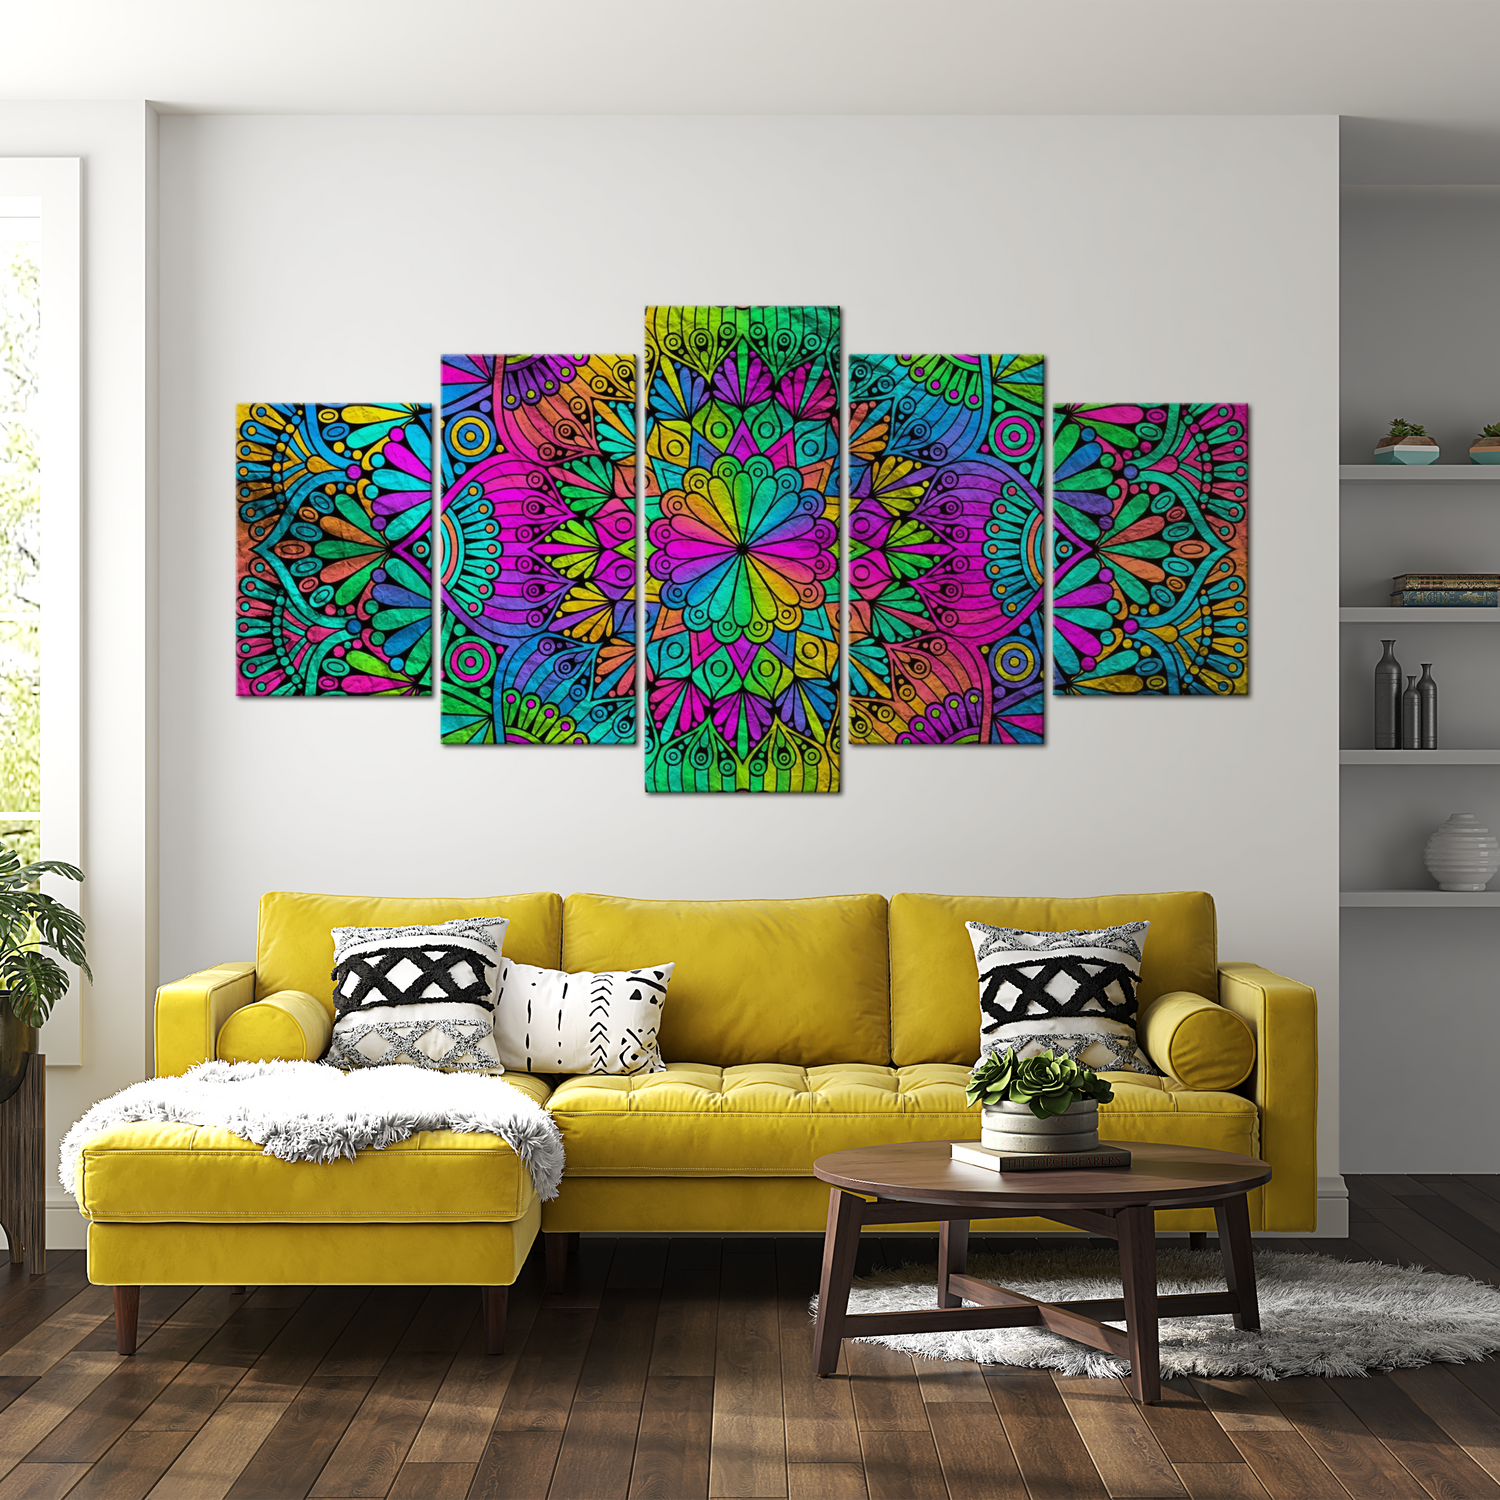 Stretched Canvas Zen Art - Mandala Peacock Feathers 40"Wx20"H